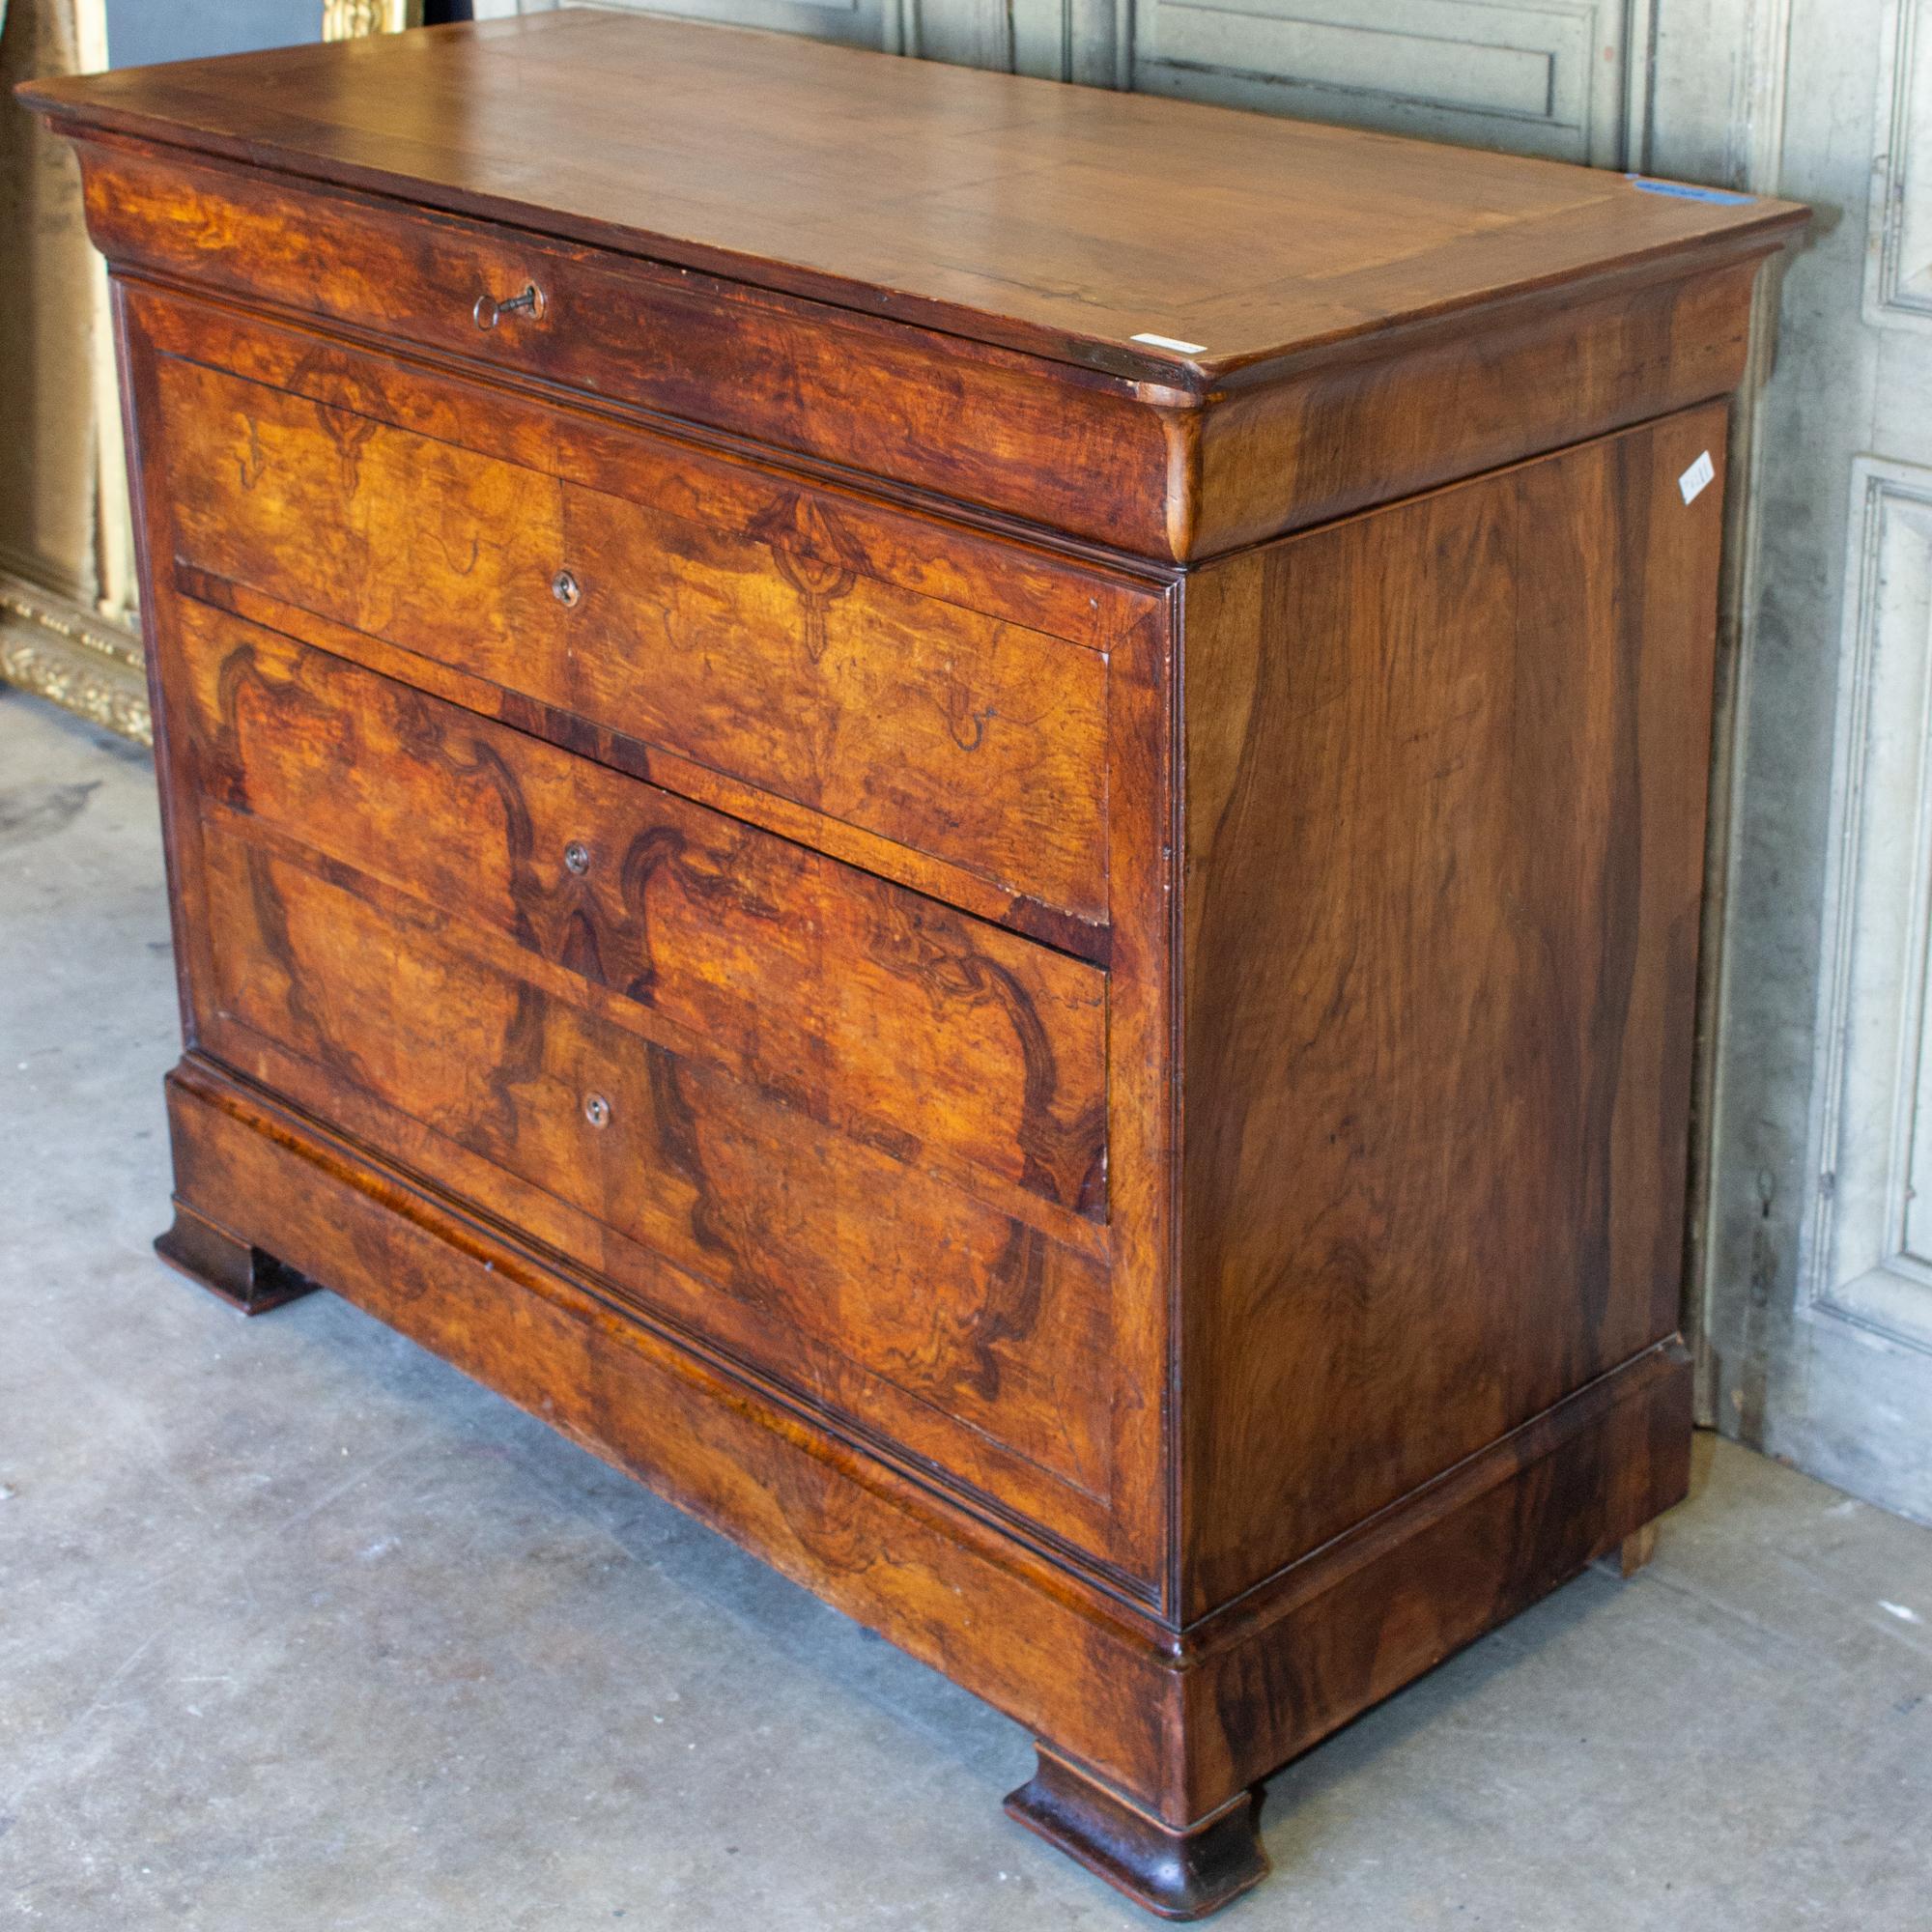 This antique French Louis Philippe style chest of drawers features a beautifully crafted burled wood finish with a bold patterning. The piece has four drawers: one narrow top drawer and three deeper, lower drawers. The carved wood escutcheons are